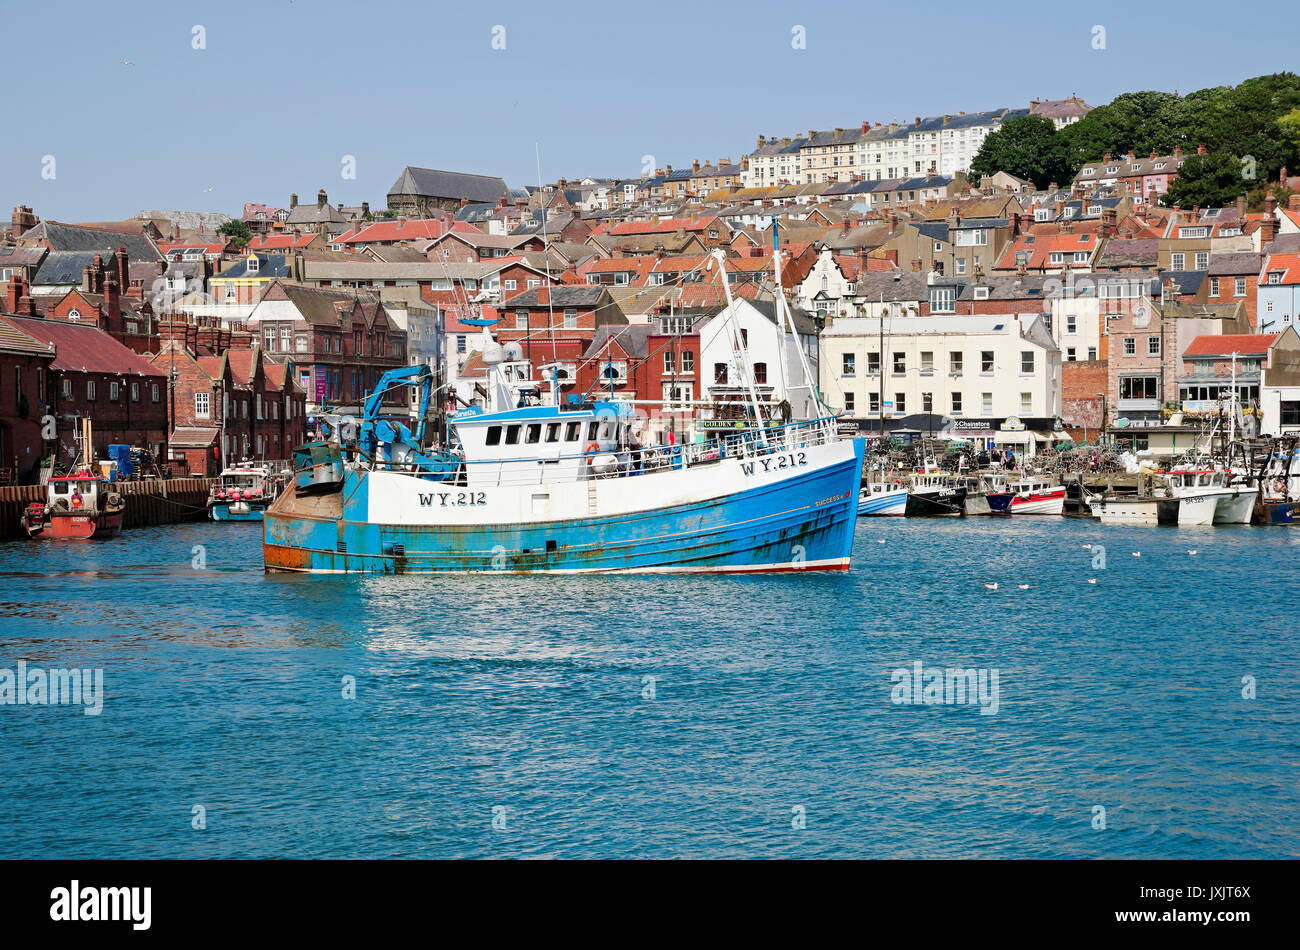 Fishing boat trawler vessel in the harbour in summer Scarborough North Yorkshire England UK United Kingdom GB Great Britain Stock Photo